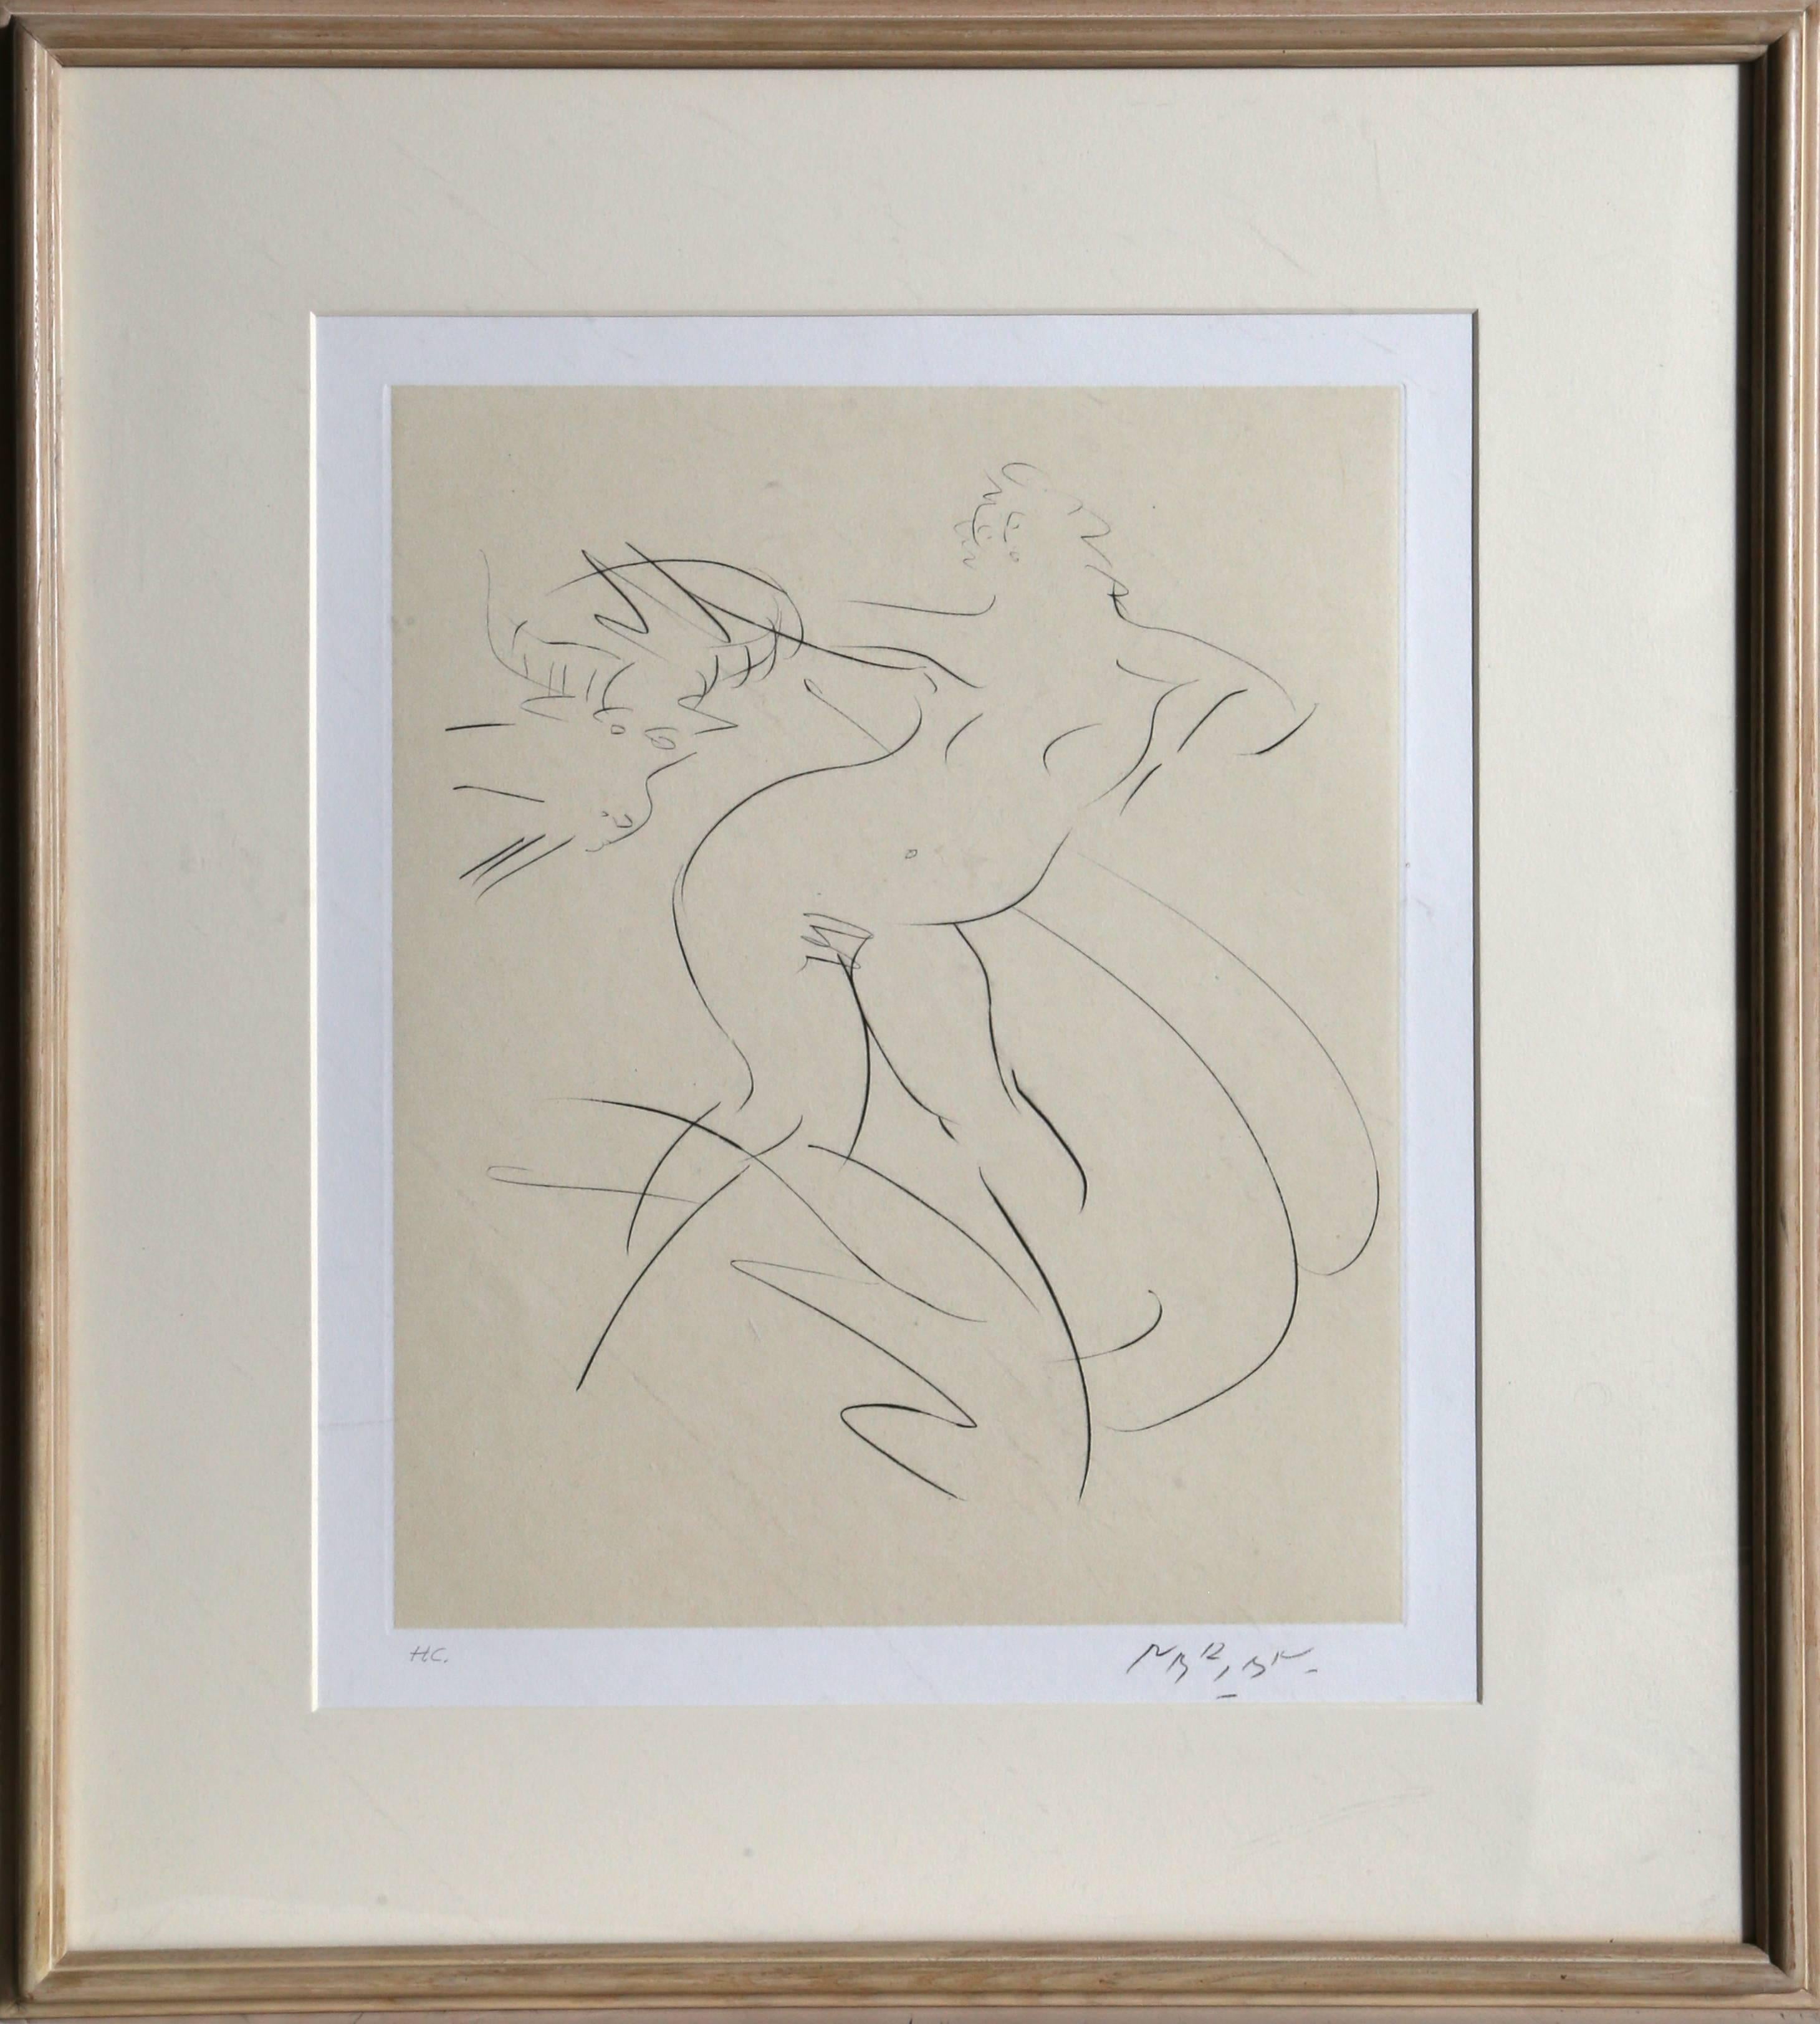 Artist: Reuben Nakian, American (1897 - 1986)
Title: Nymph and Goat 4 (Black) from Myths and Legends
Year: 1979
Medium: Drypoint Etching with Chine Colle on Rives, signed and numbered in pencil
Edition: 75, HC
Image: 16.5 x 13.5 inches
Size: 25.75 x